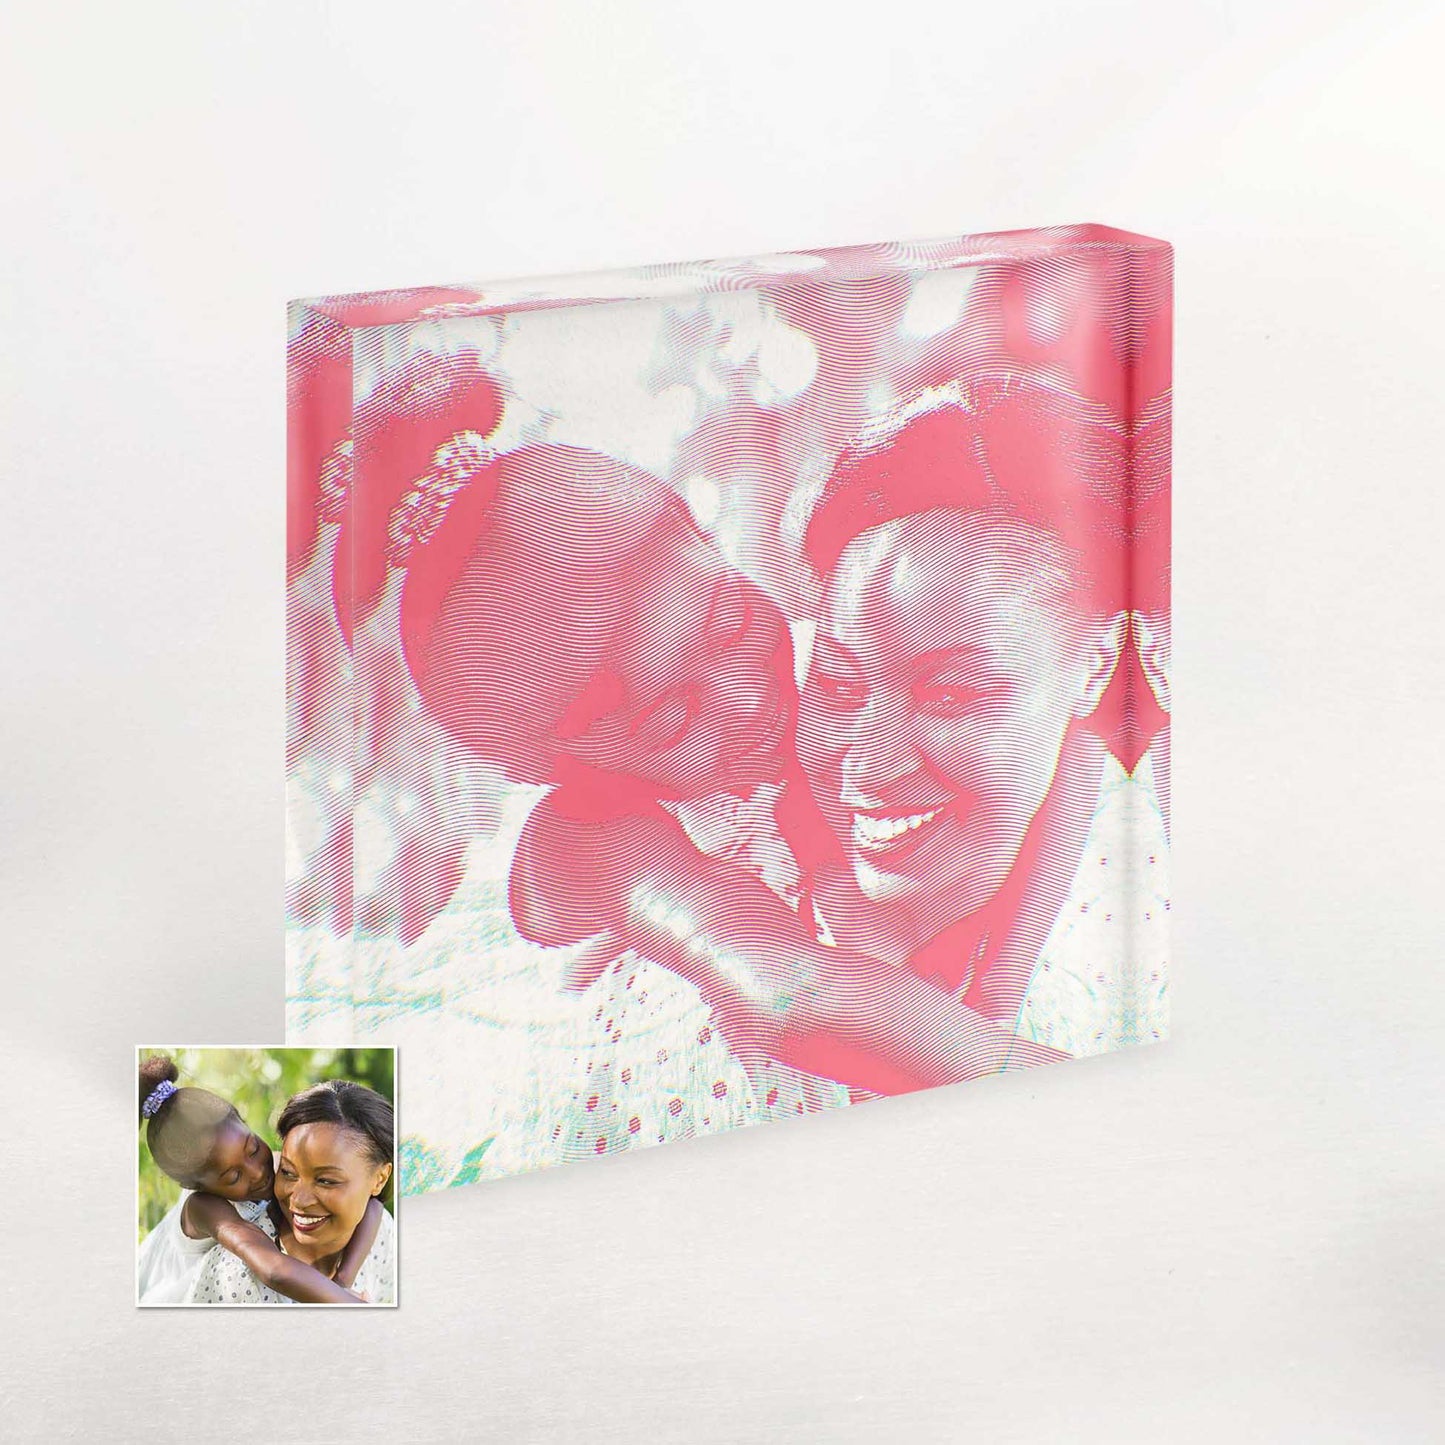 Personalise your gift-giving with our Personalised Pink Engraving Acrylic Block Photo. Its minimalist design embodies style and sophistication, making it a trendy and cool choice for anniversaries, birthdays